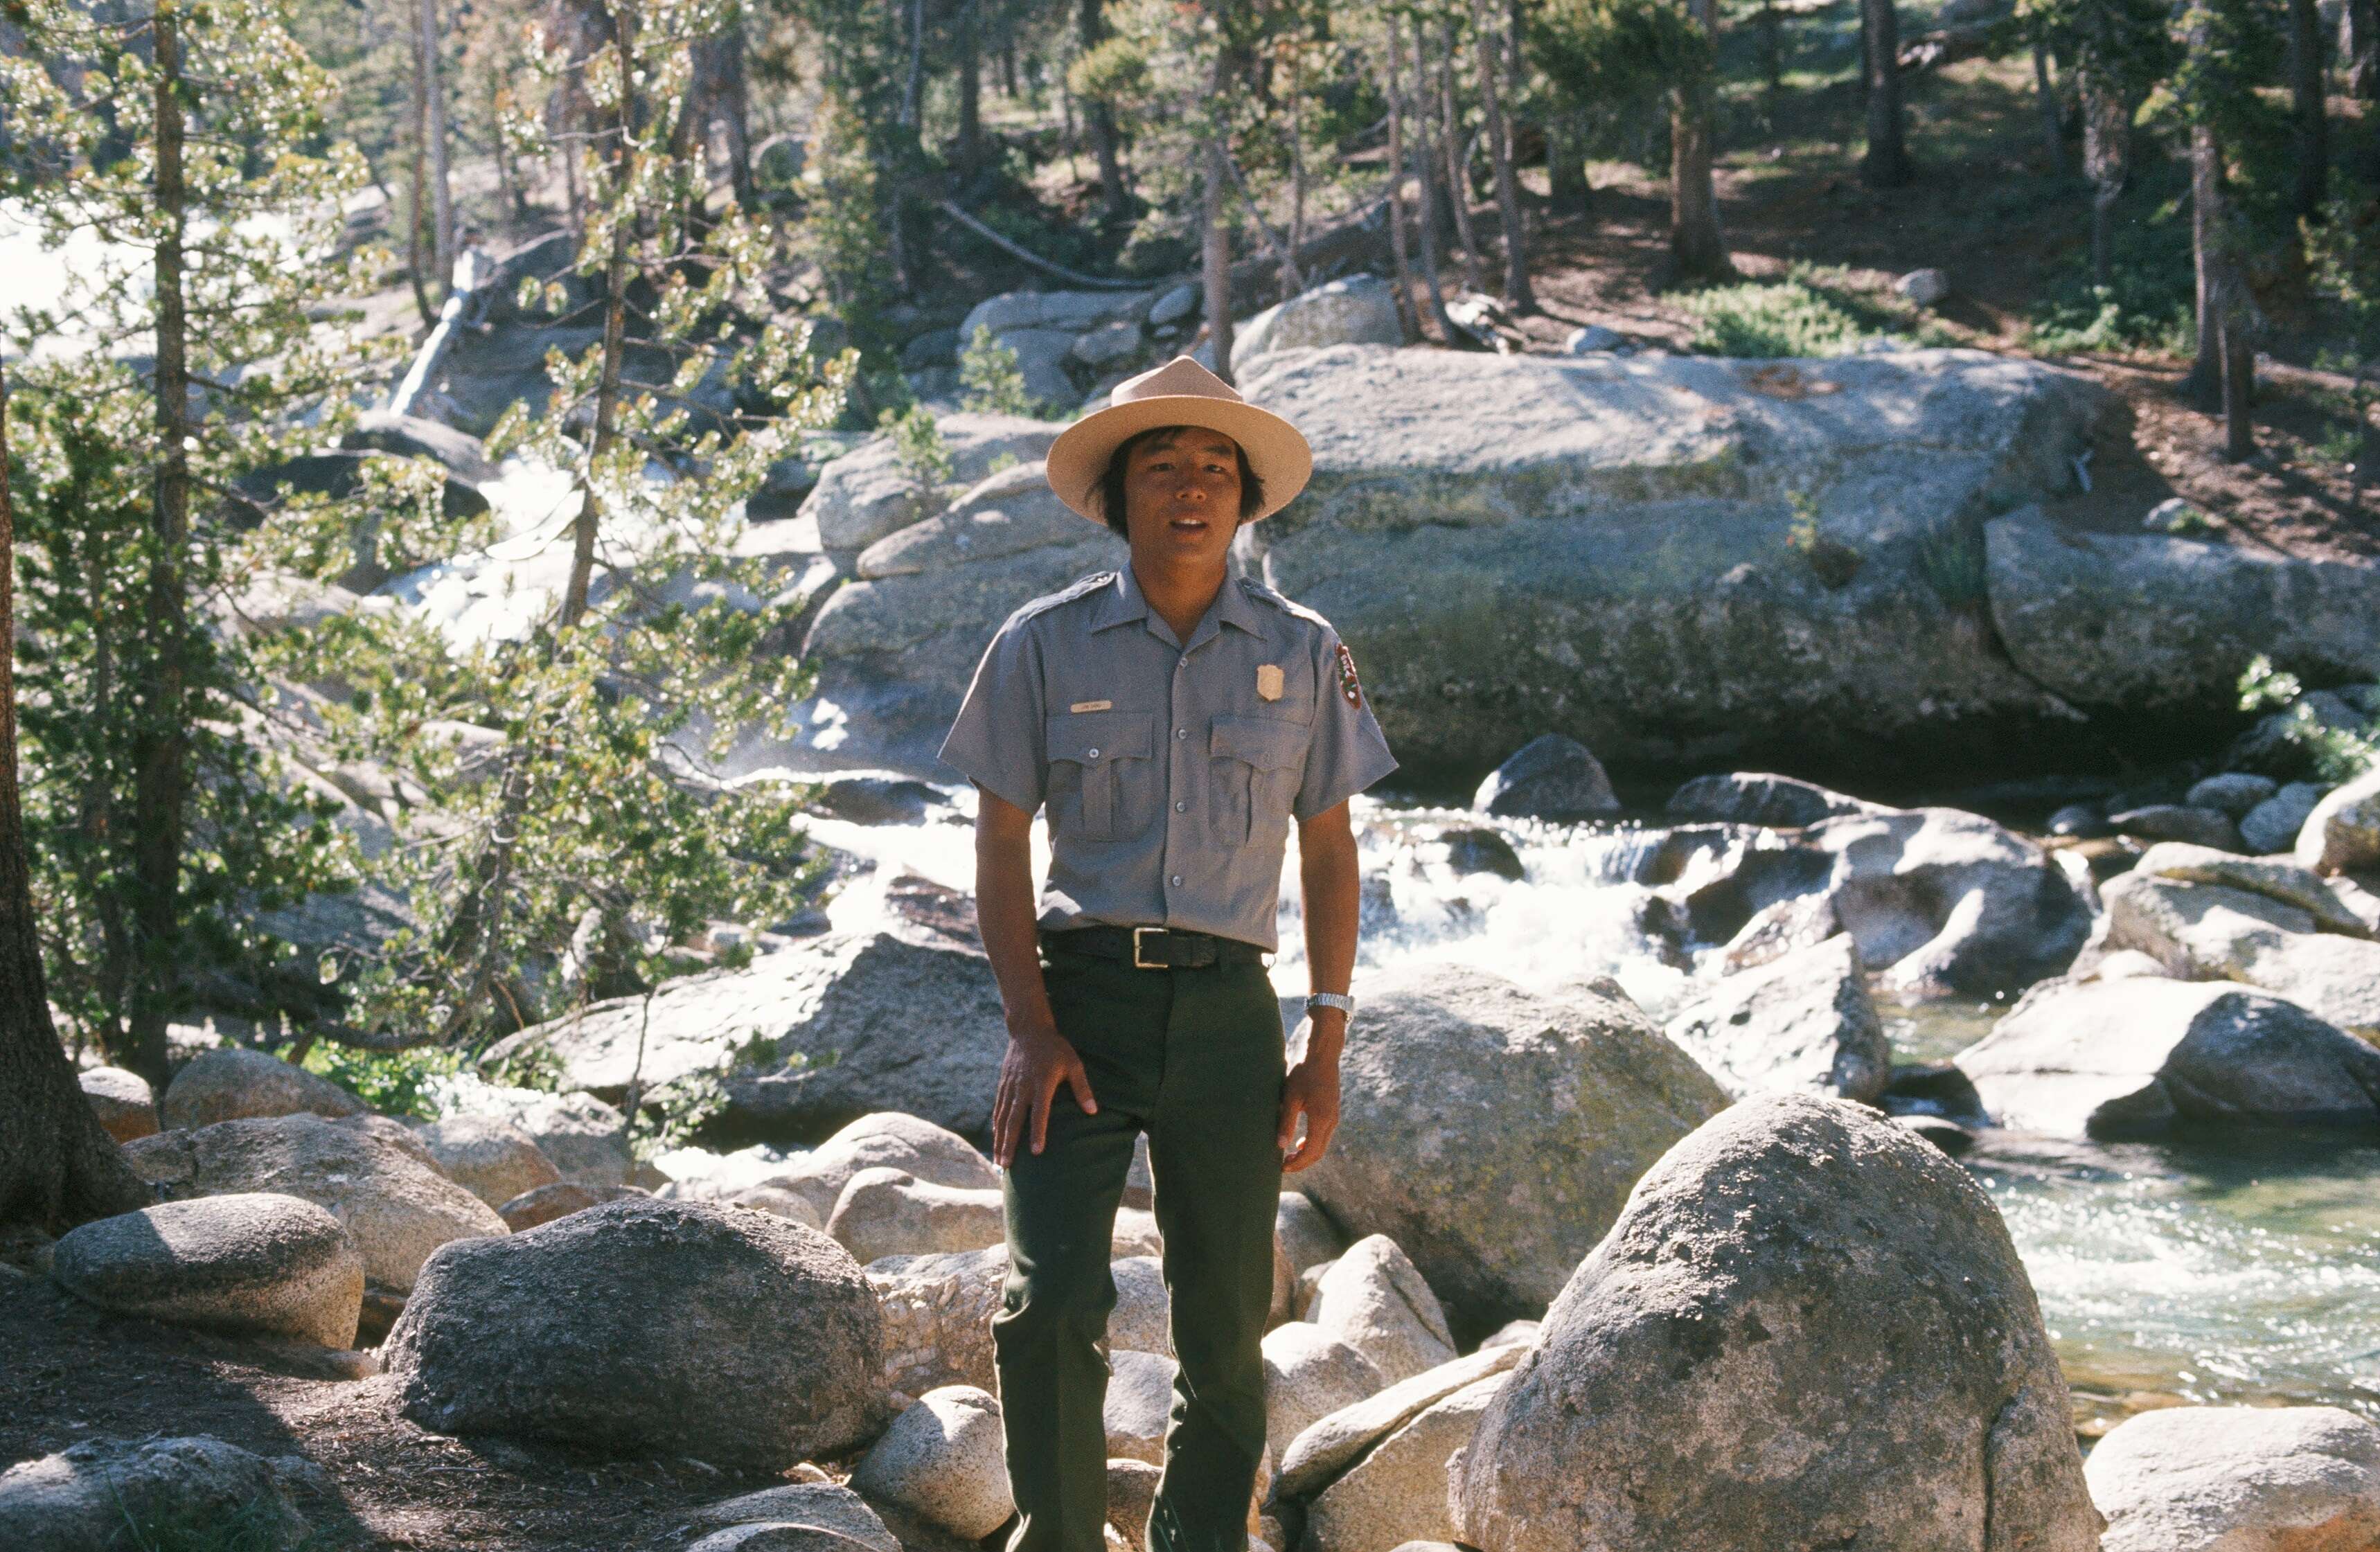 Jim Sano during his early days as a park ranger at Yosemite National Park in California. Photo coutesy of Jim Sano